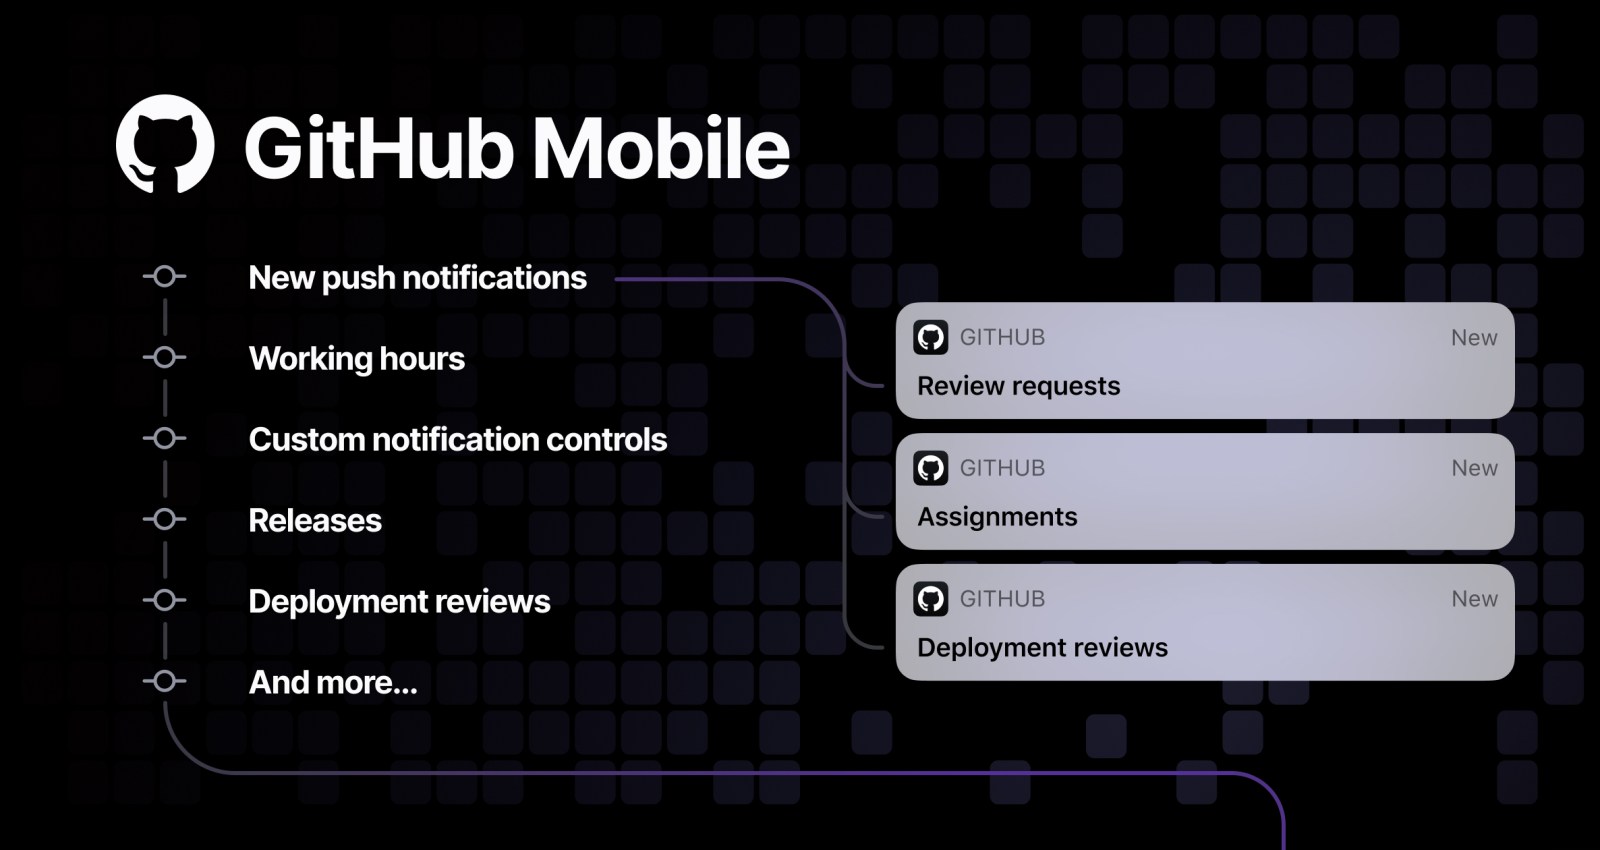 Introducing new push notifications, scheduling, releases and more on GitHub Mobile